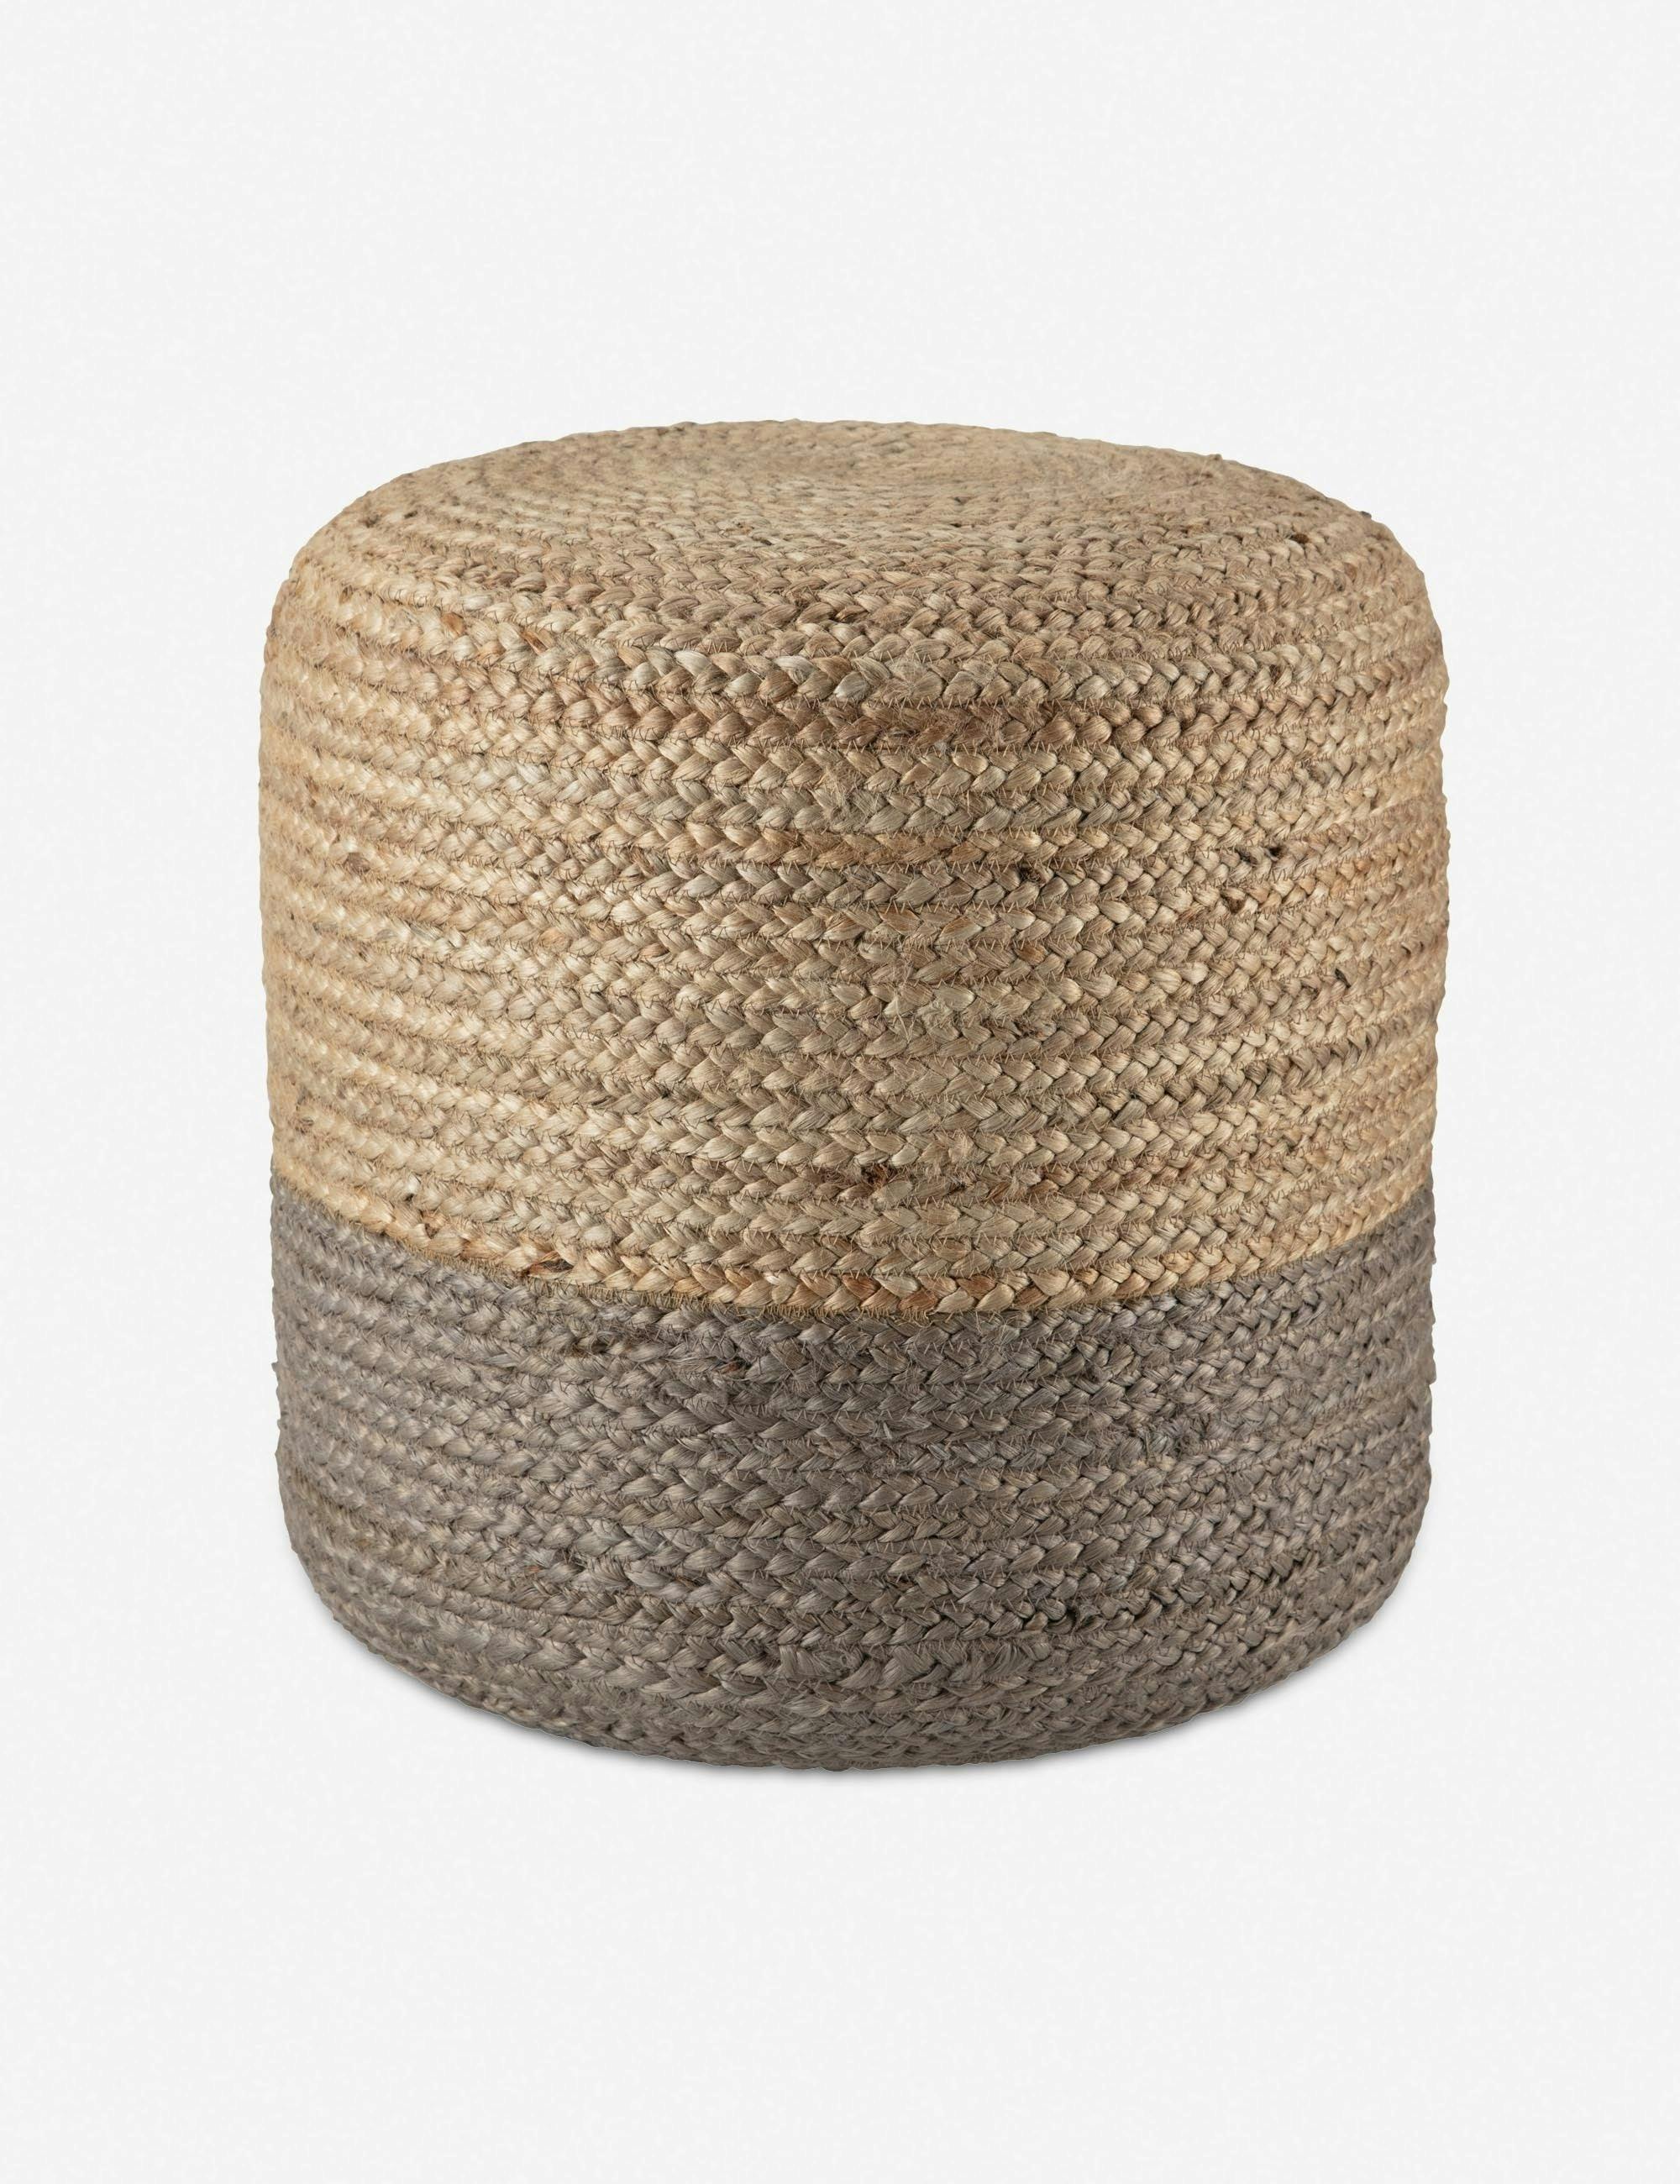 Oliana Artisan Braided Jute Pouf in Taupe & Natural - 18" Round